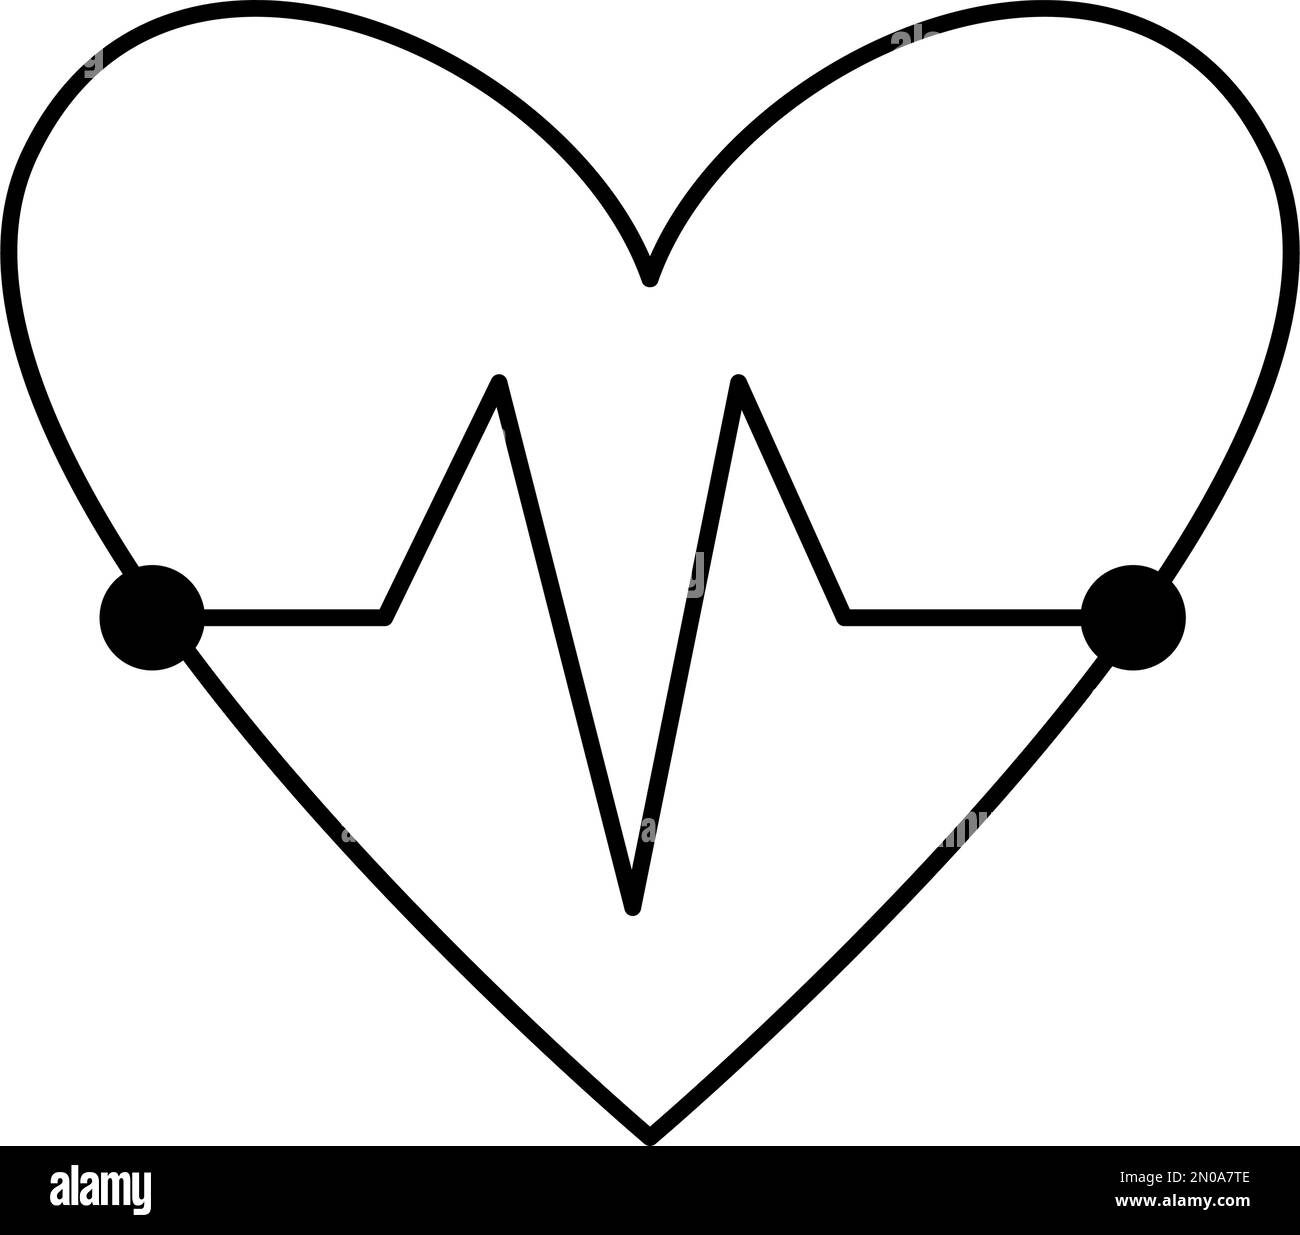 Vector flat heart rate icon outline. Medical symbol line art picture ...